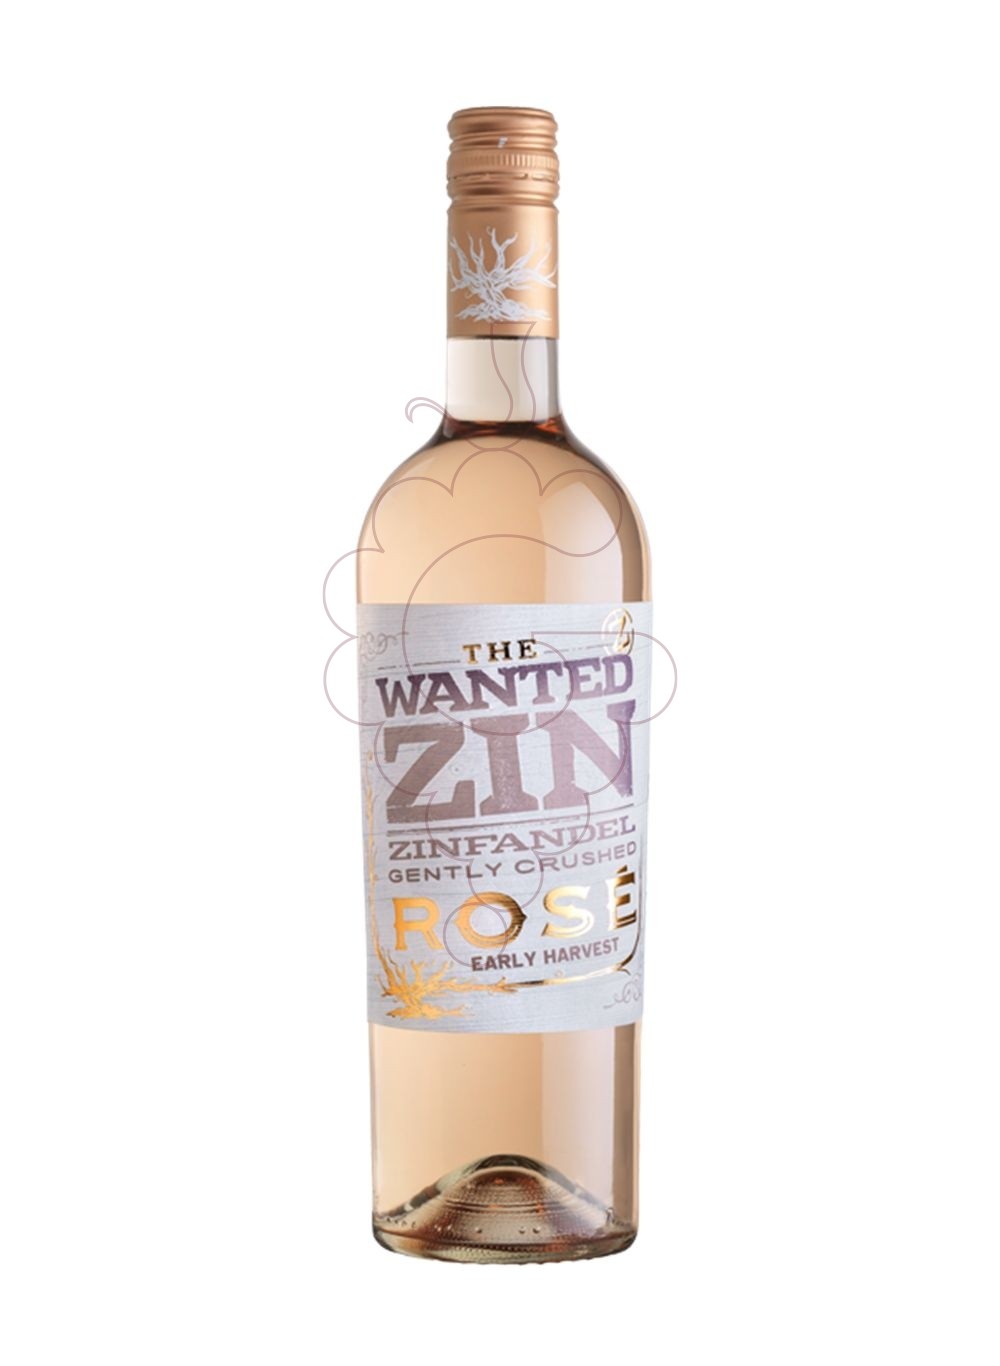 Photo The wanted zin rose 75 cl rosé wine